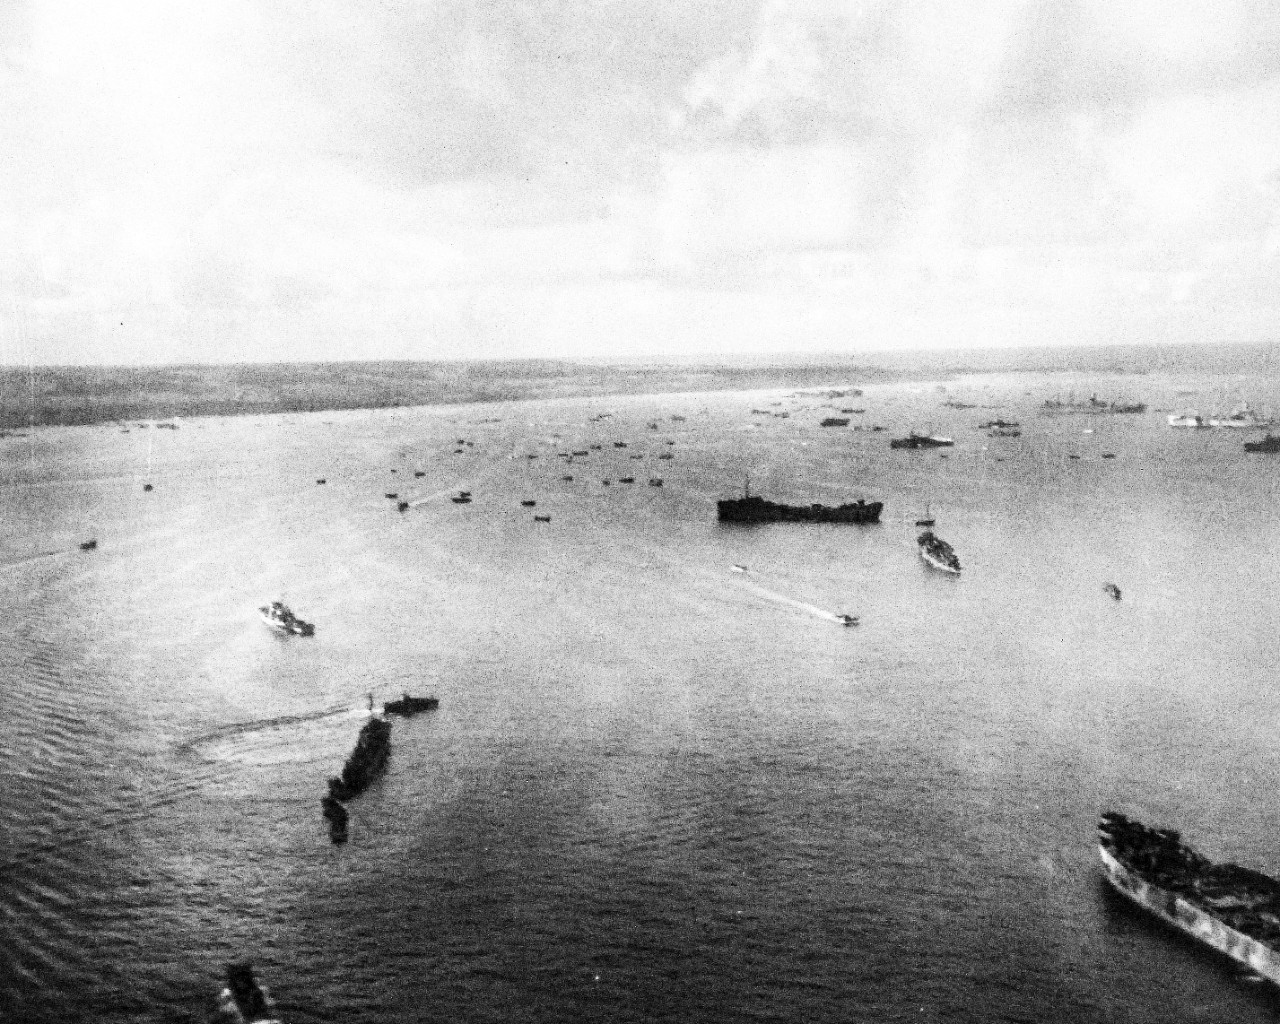 80-G-384139:   Invasion of Saipain, June-July 1944.  Aerials of Saipan Island.  Taken by plane from USS White Plains (CVE 66), June 24, 1944.   Official U.S. Navy Photograph, now in the collection of the National Archives.   (2015/3/4).